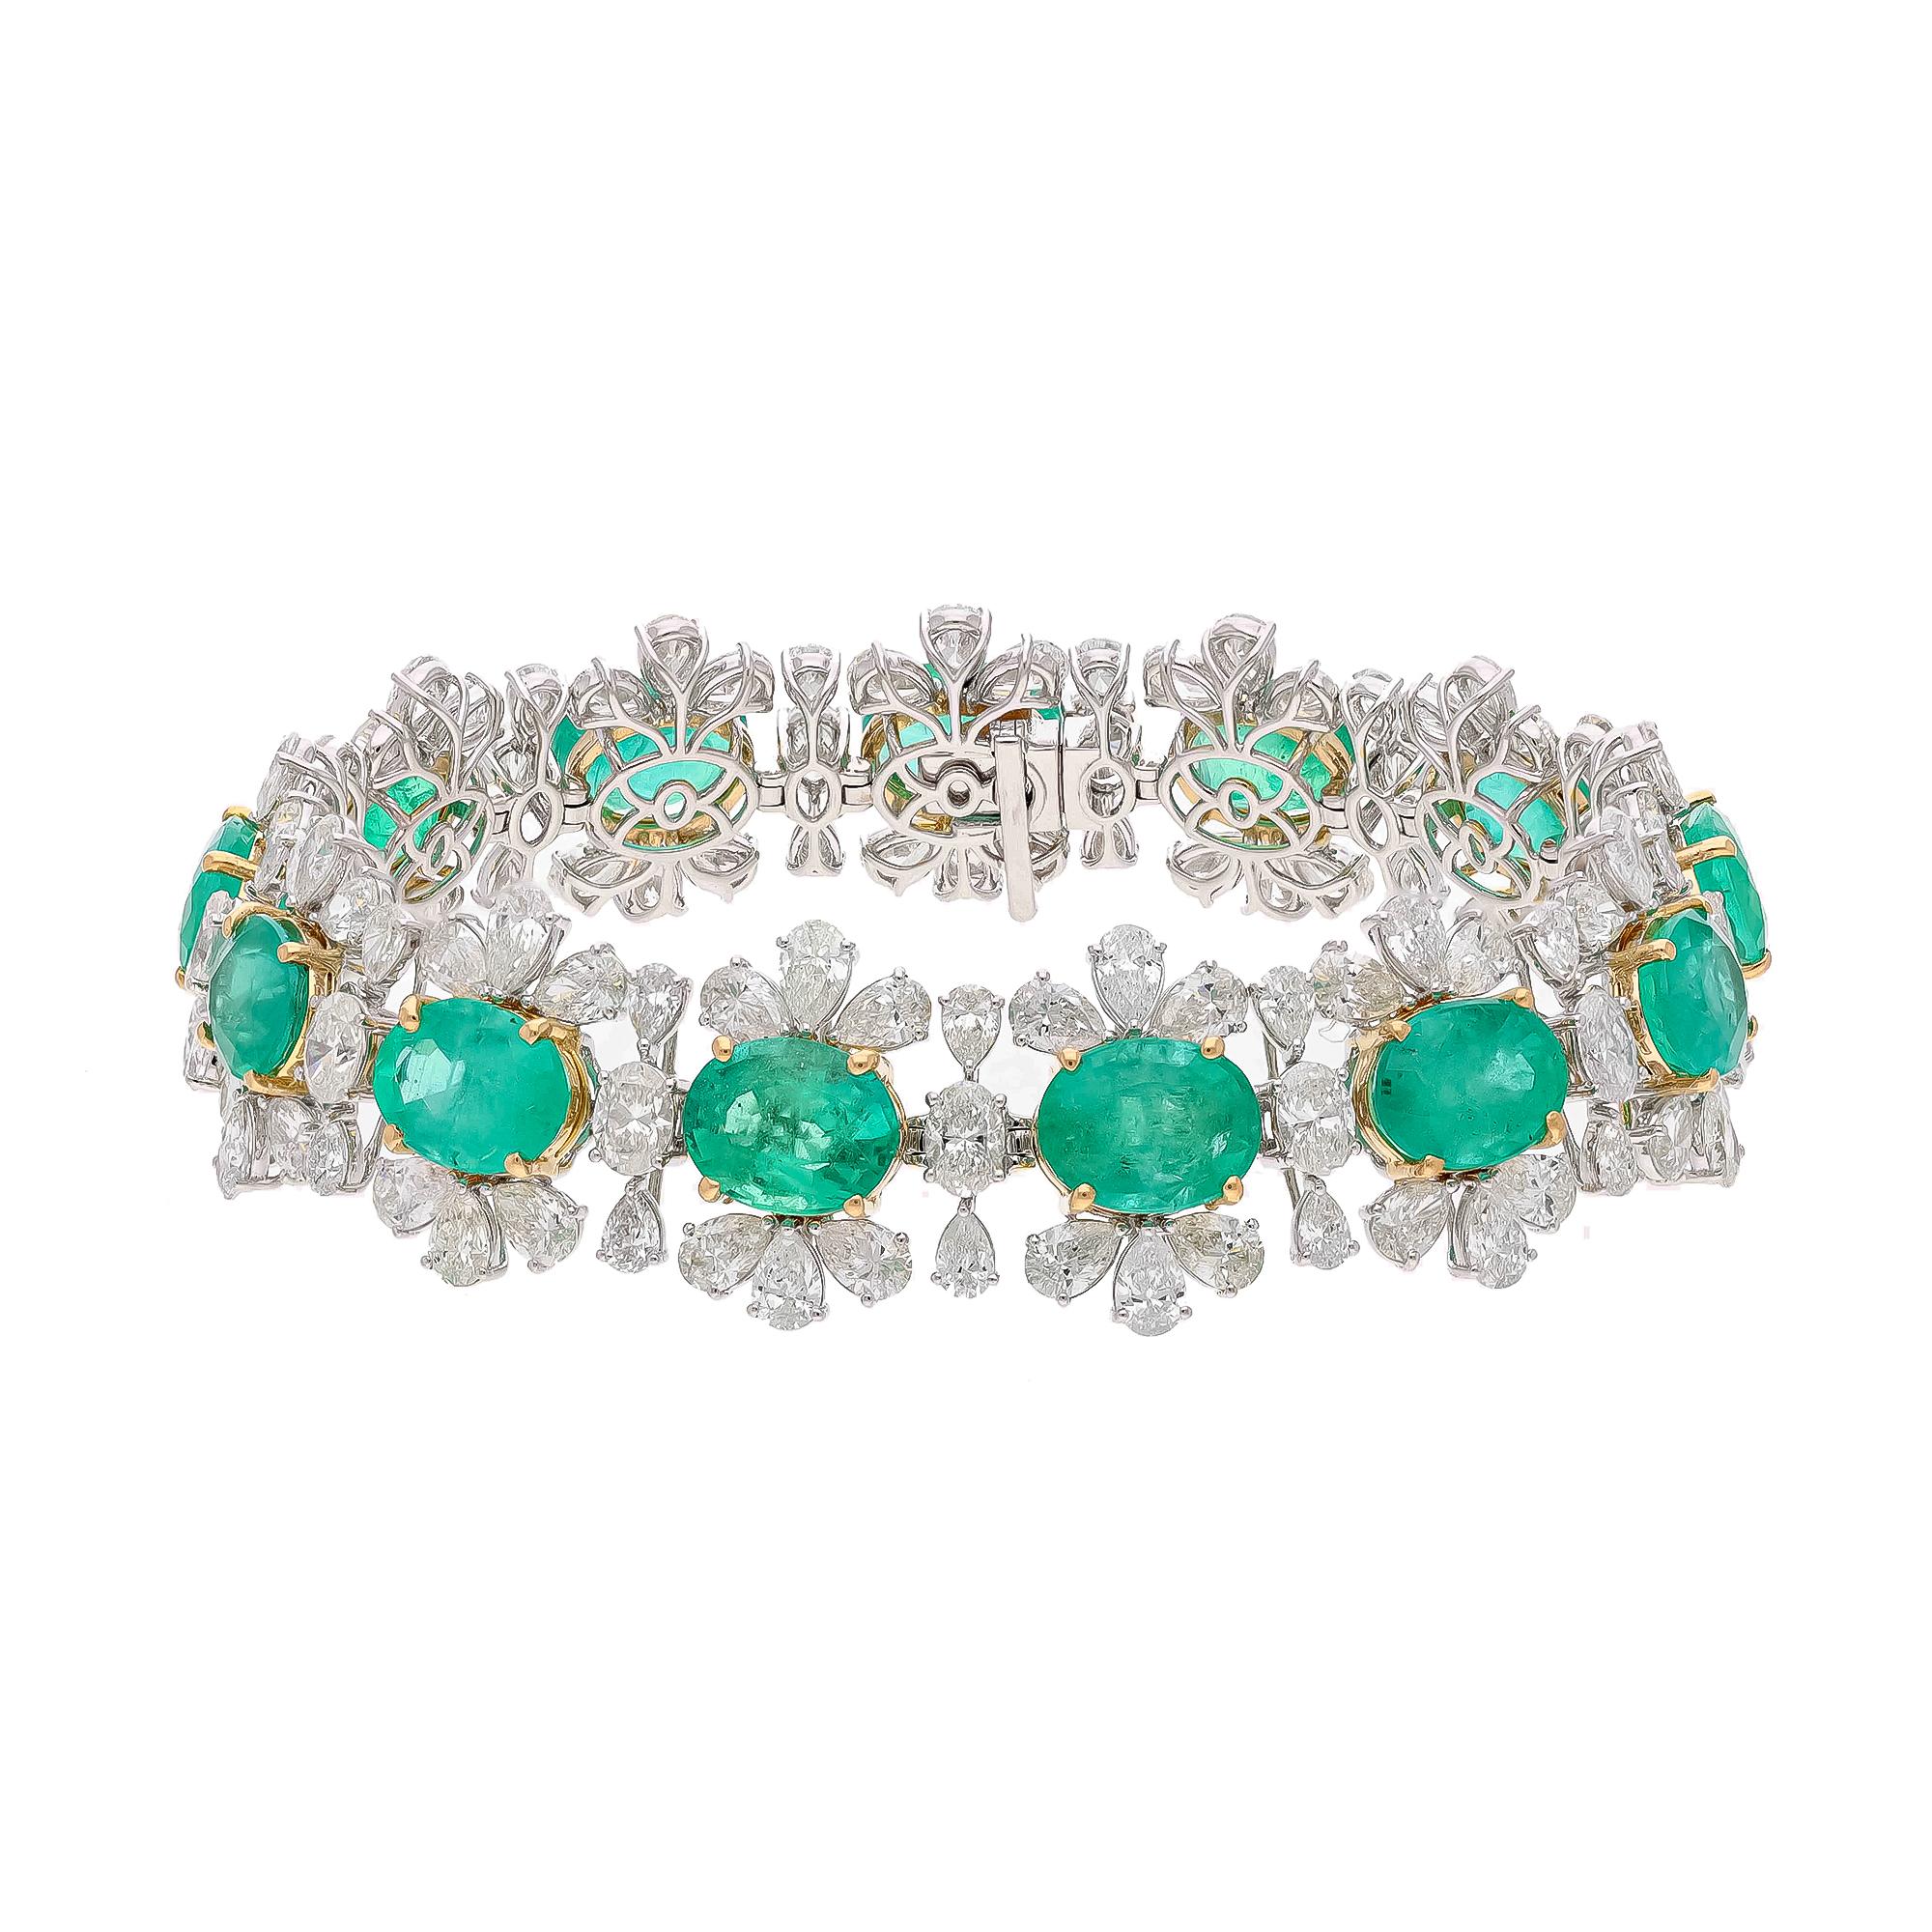 This is a natural Zambian Emerald bracelet with diamonds and 18k gold. The emeralds are very high quality and very good quality diamonds the clarity is vsi and G colour


Emeralds : 25.43 carats
diamonds : 15.70 carats
gold : 23.704 gms

This is a